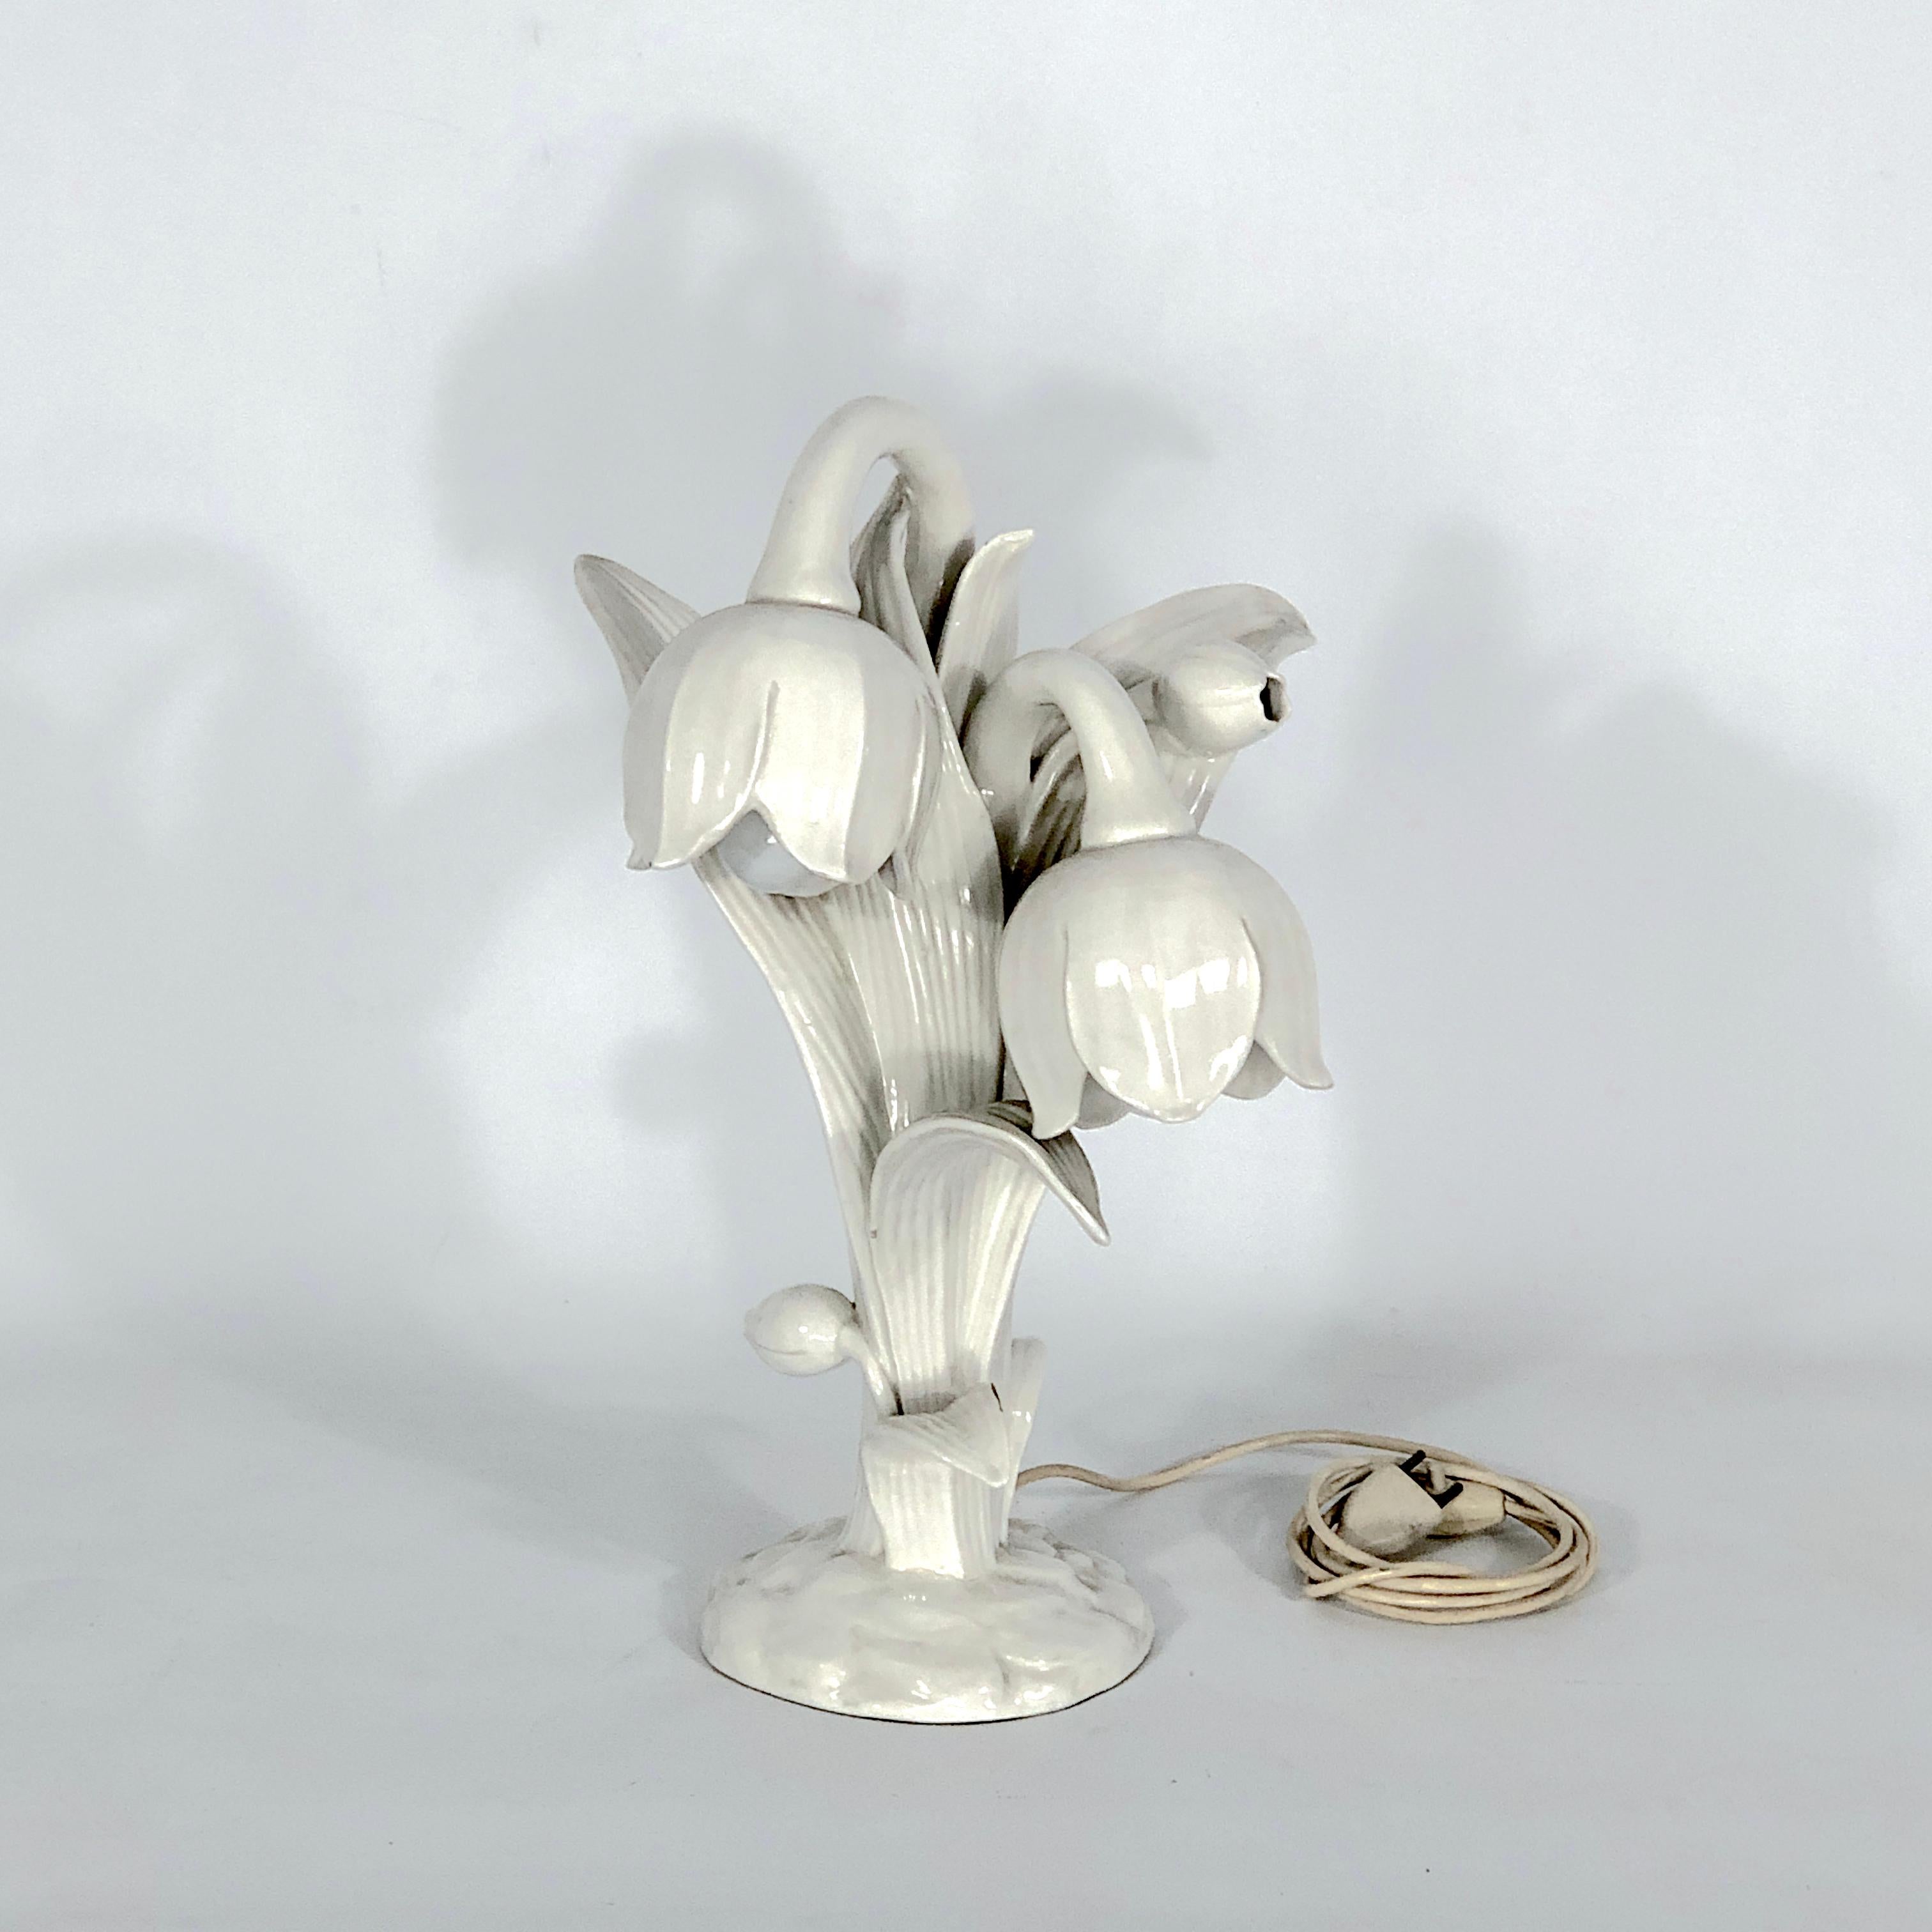 Great vintage condition for this table lamp made from white porcelain and produced in Italy during the 30s. Full working with EU standard, adaptable on demand for USA standard.